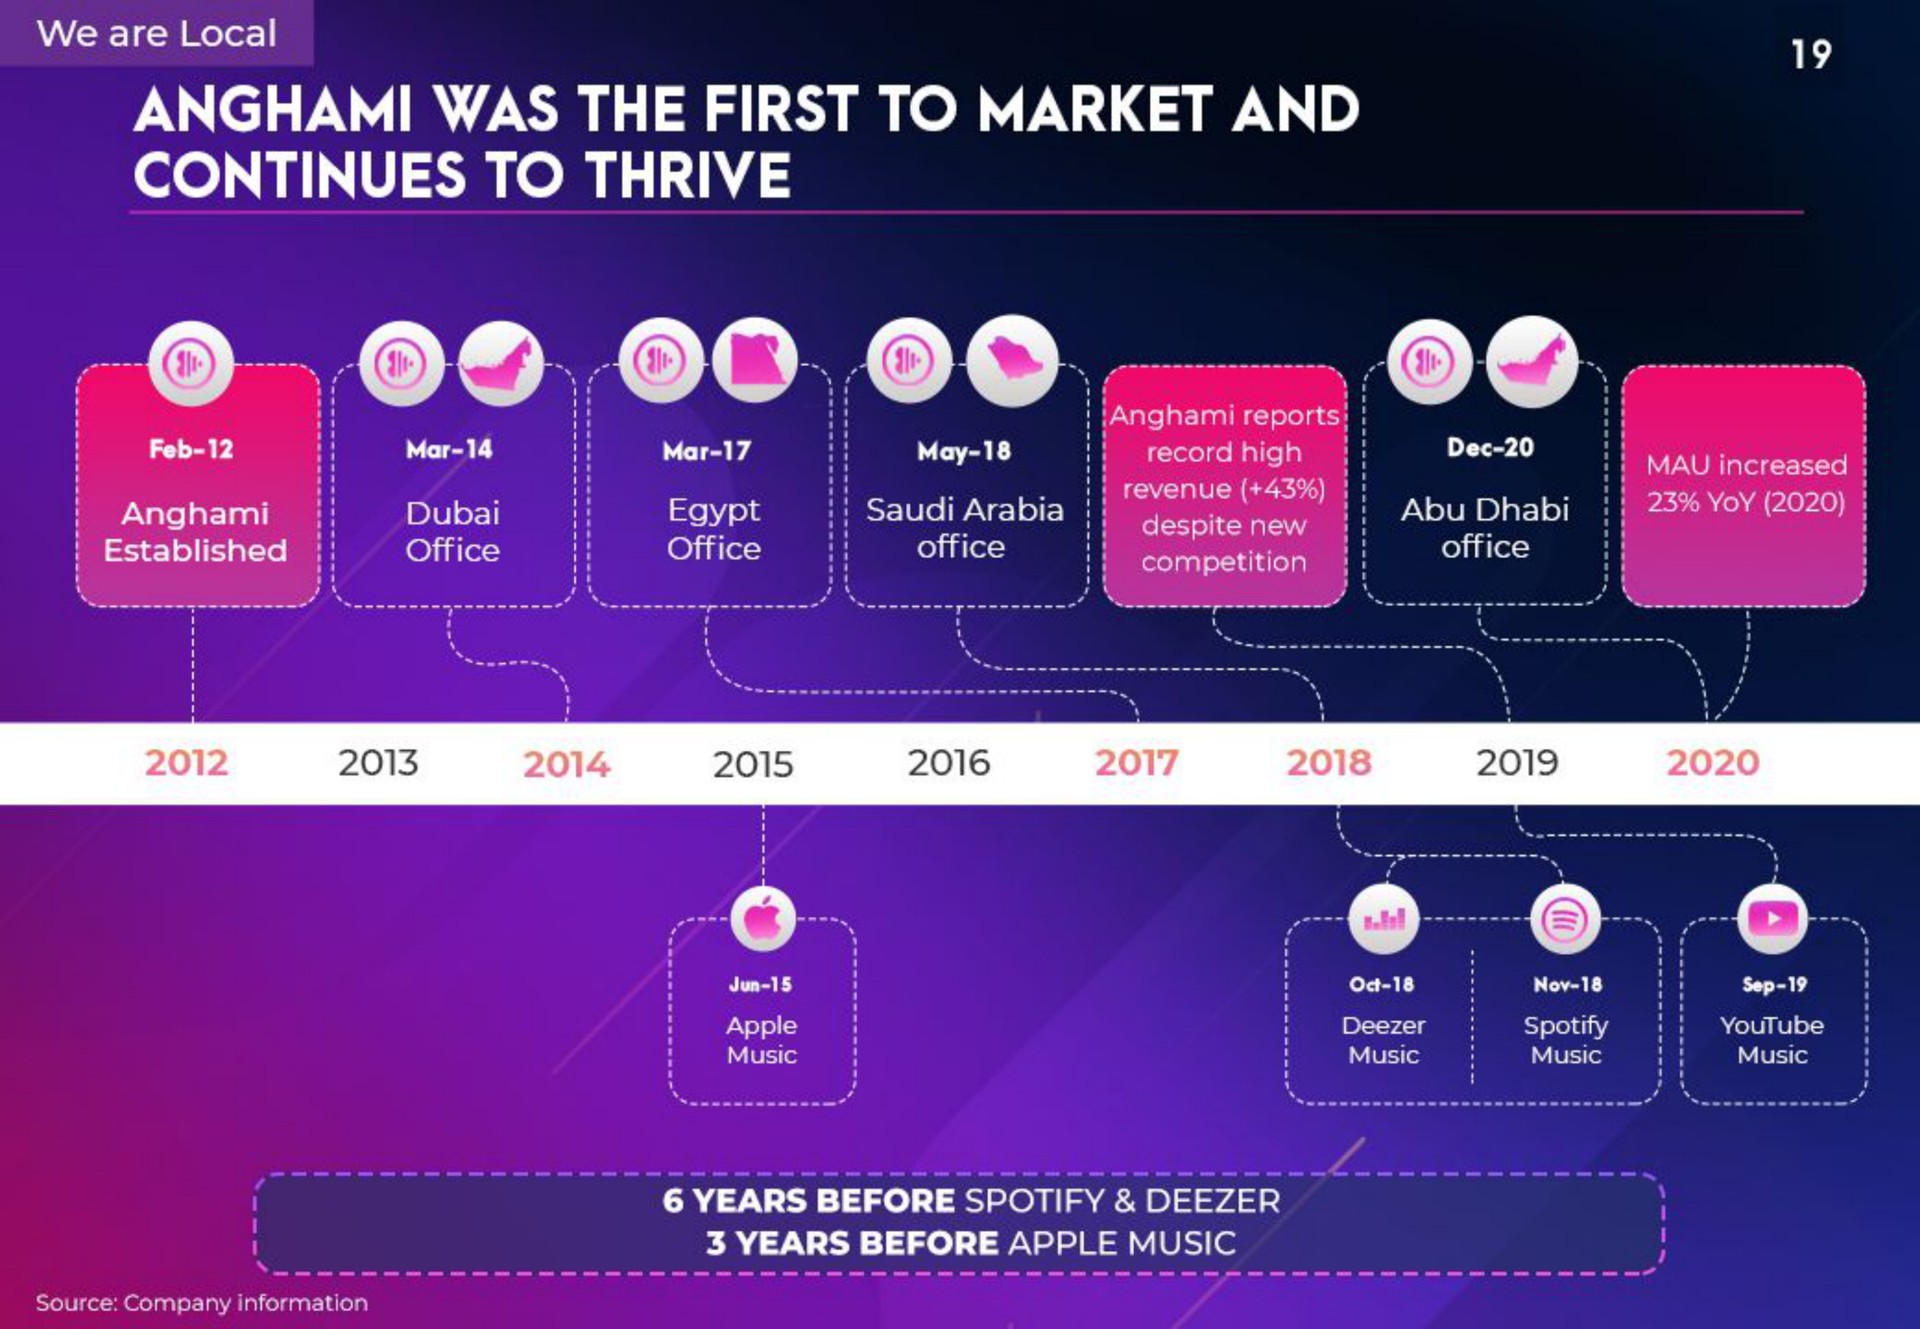 was the first to market and continues to thrive | Anghami